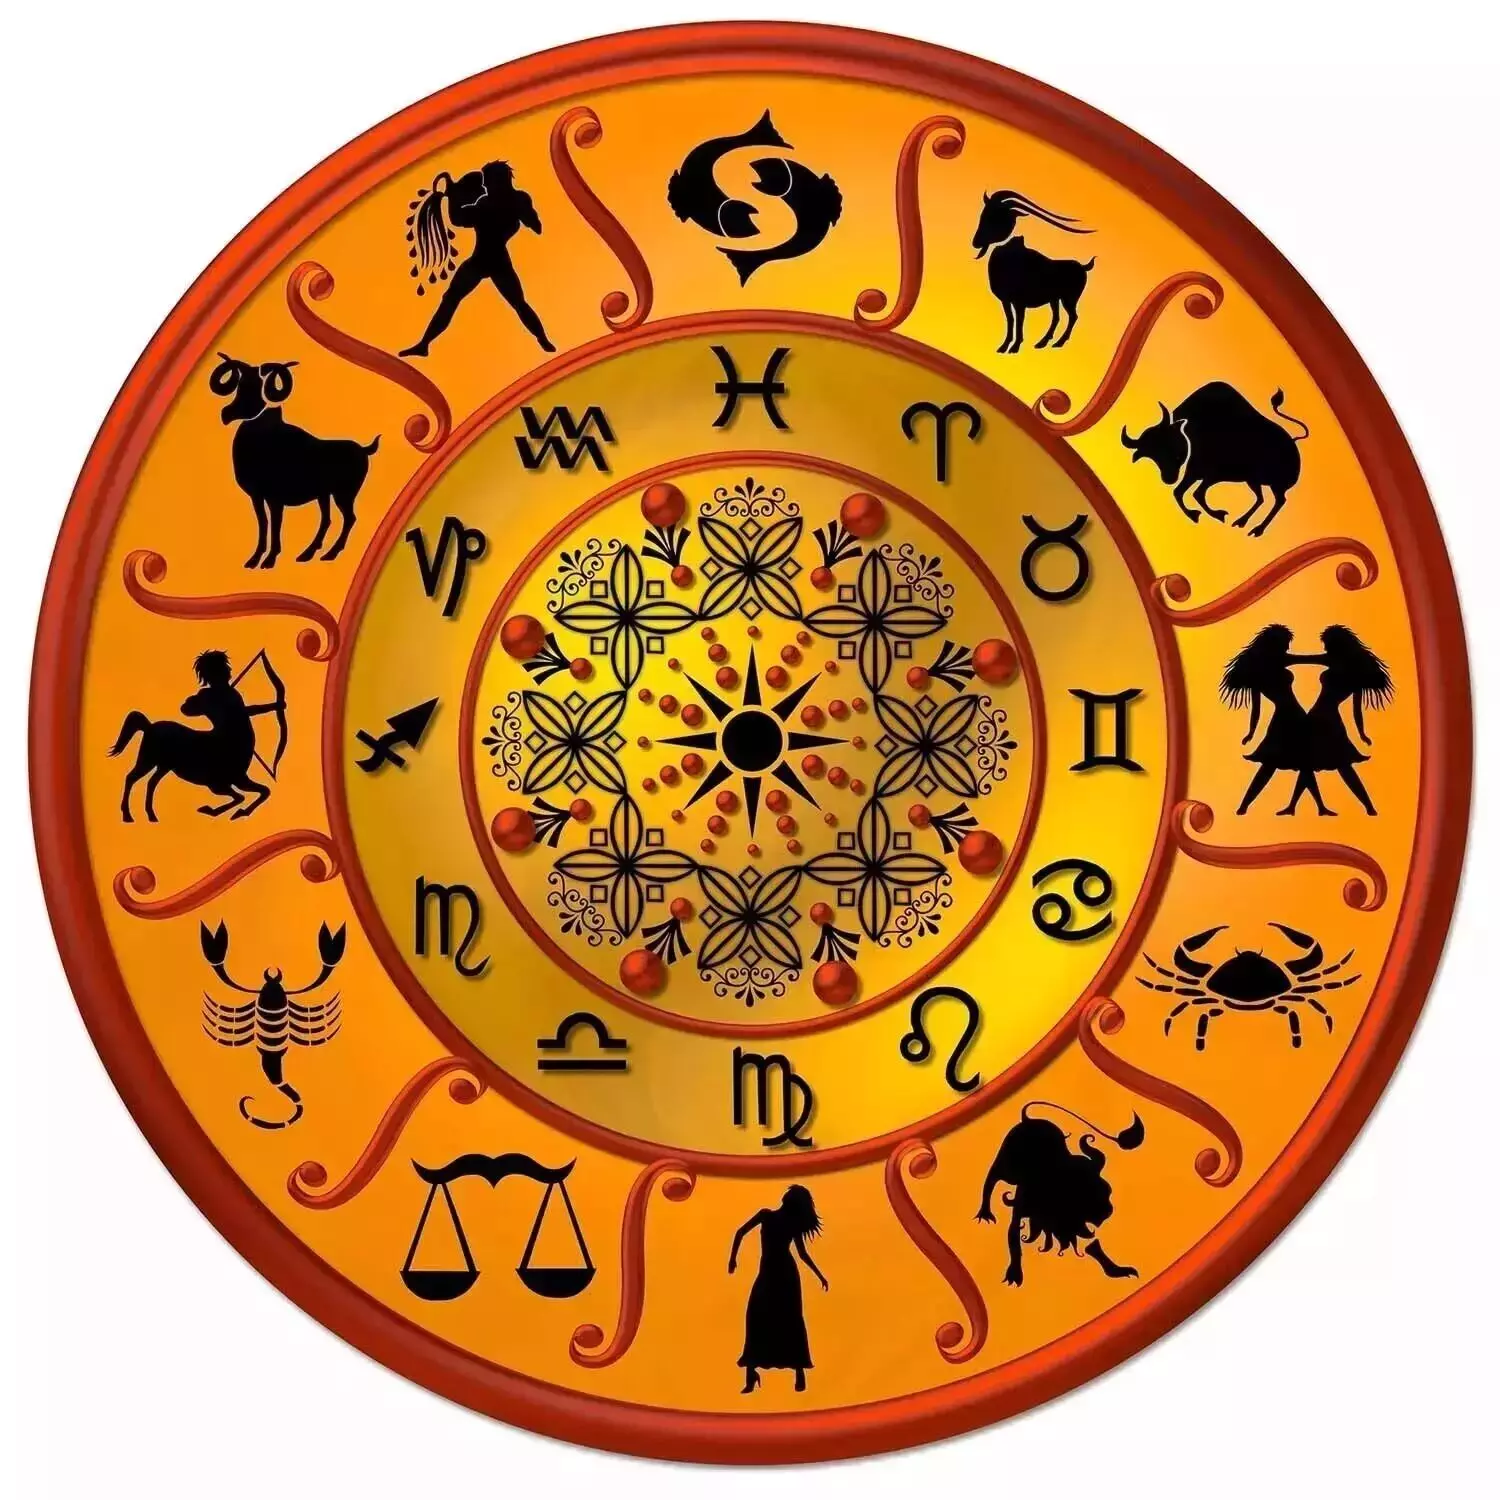 07 April  – Know your todays horoscope